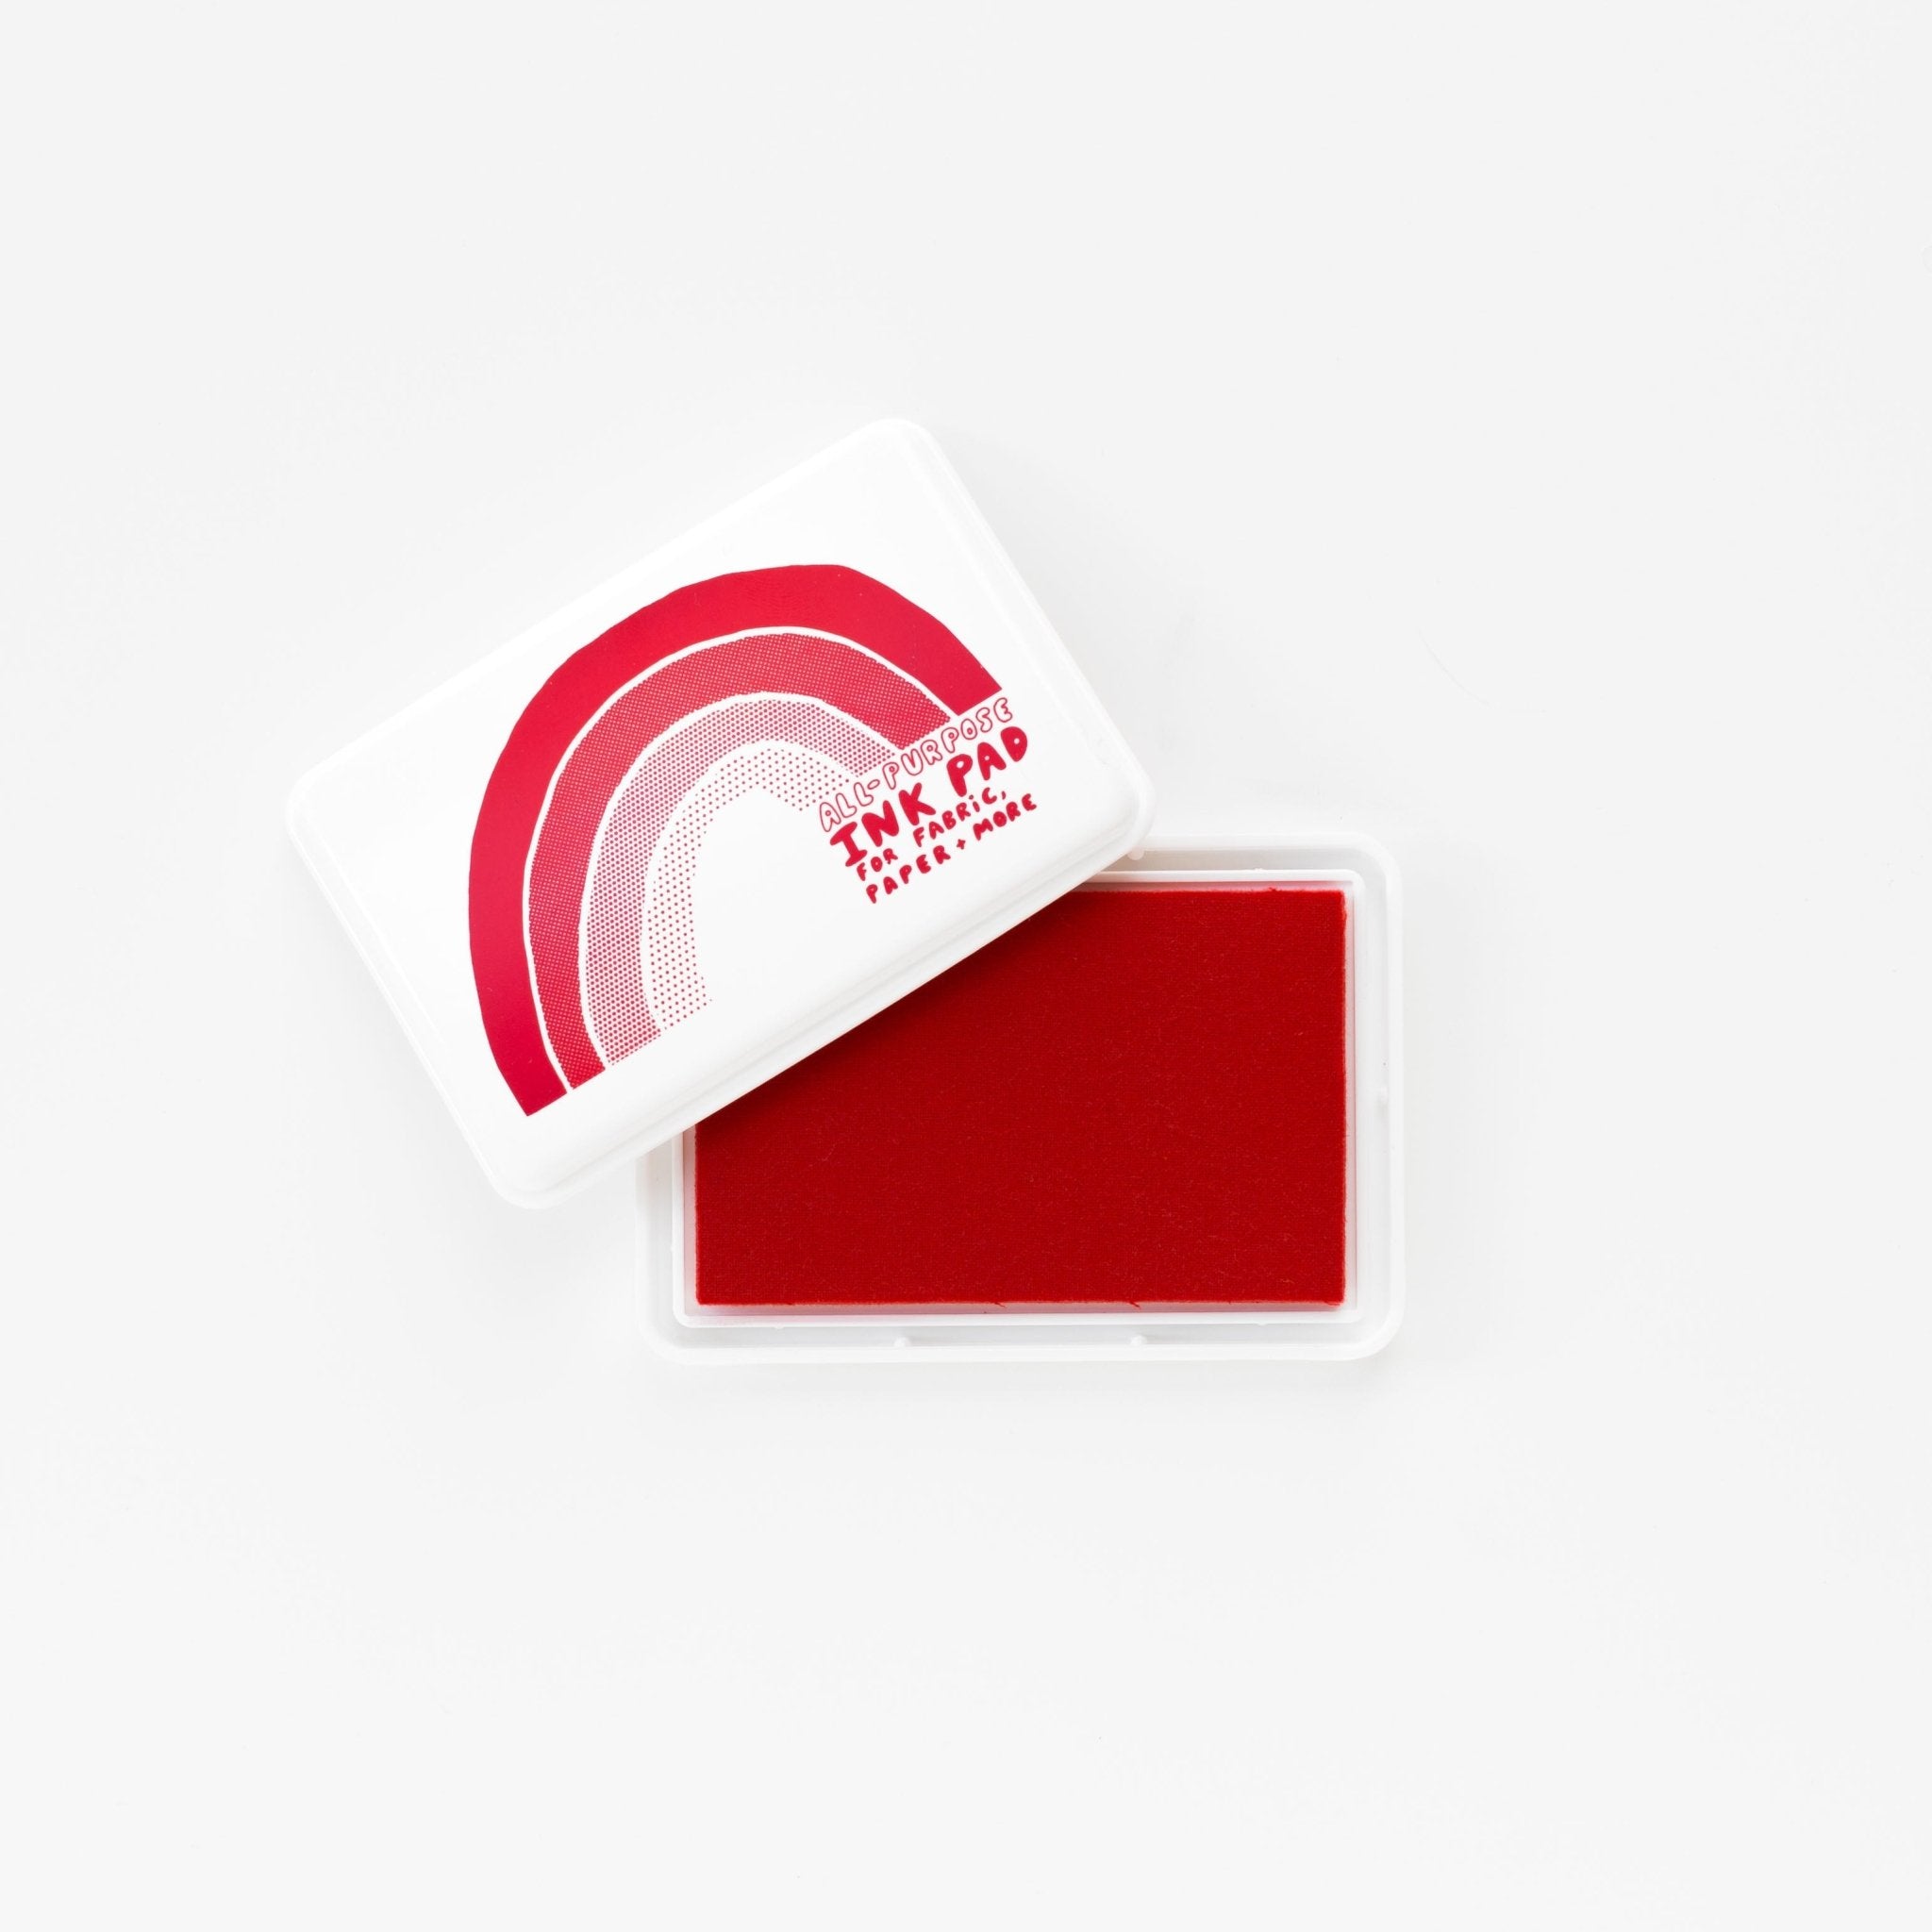 Stamp Pad, Red